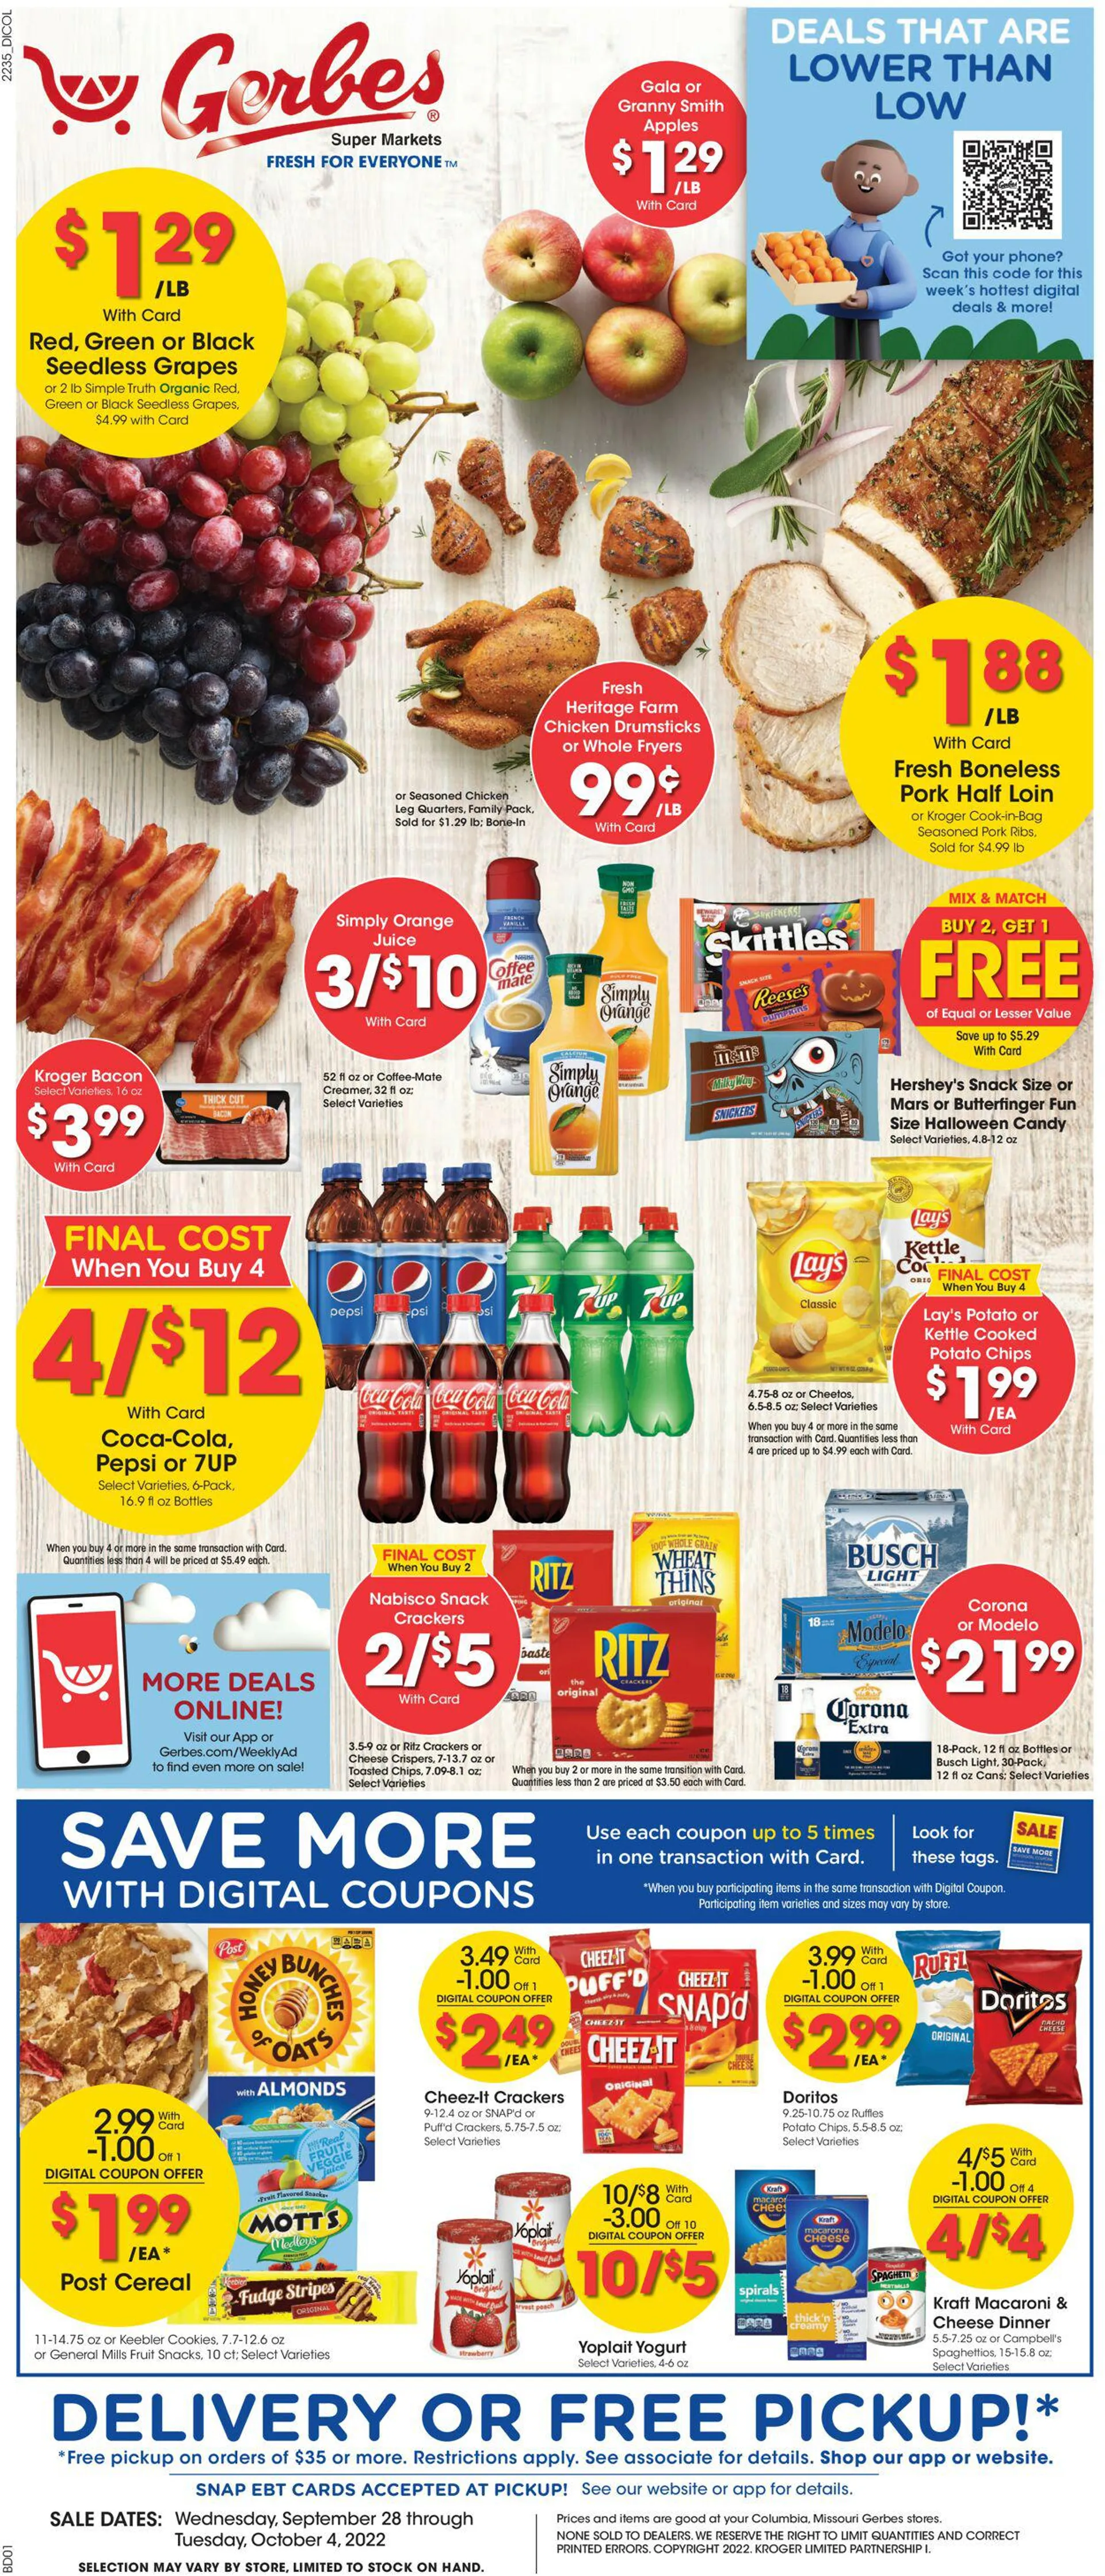 Gerbes Super Markets Current weekly ad - 1